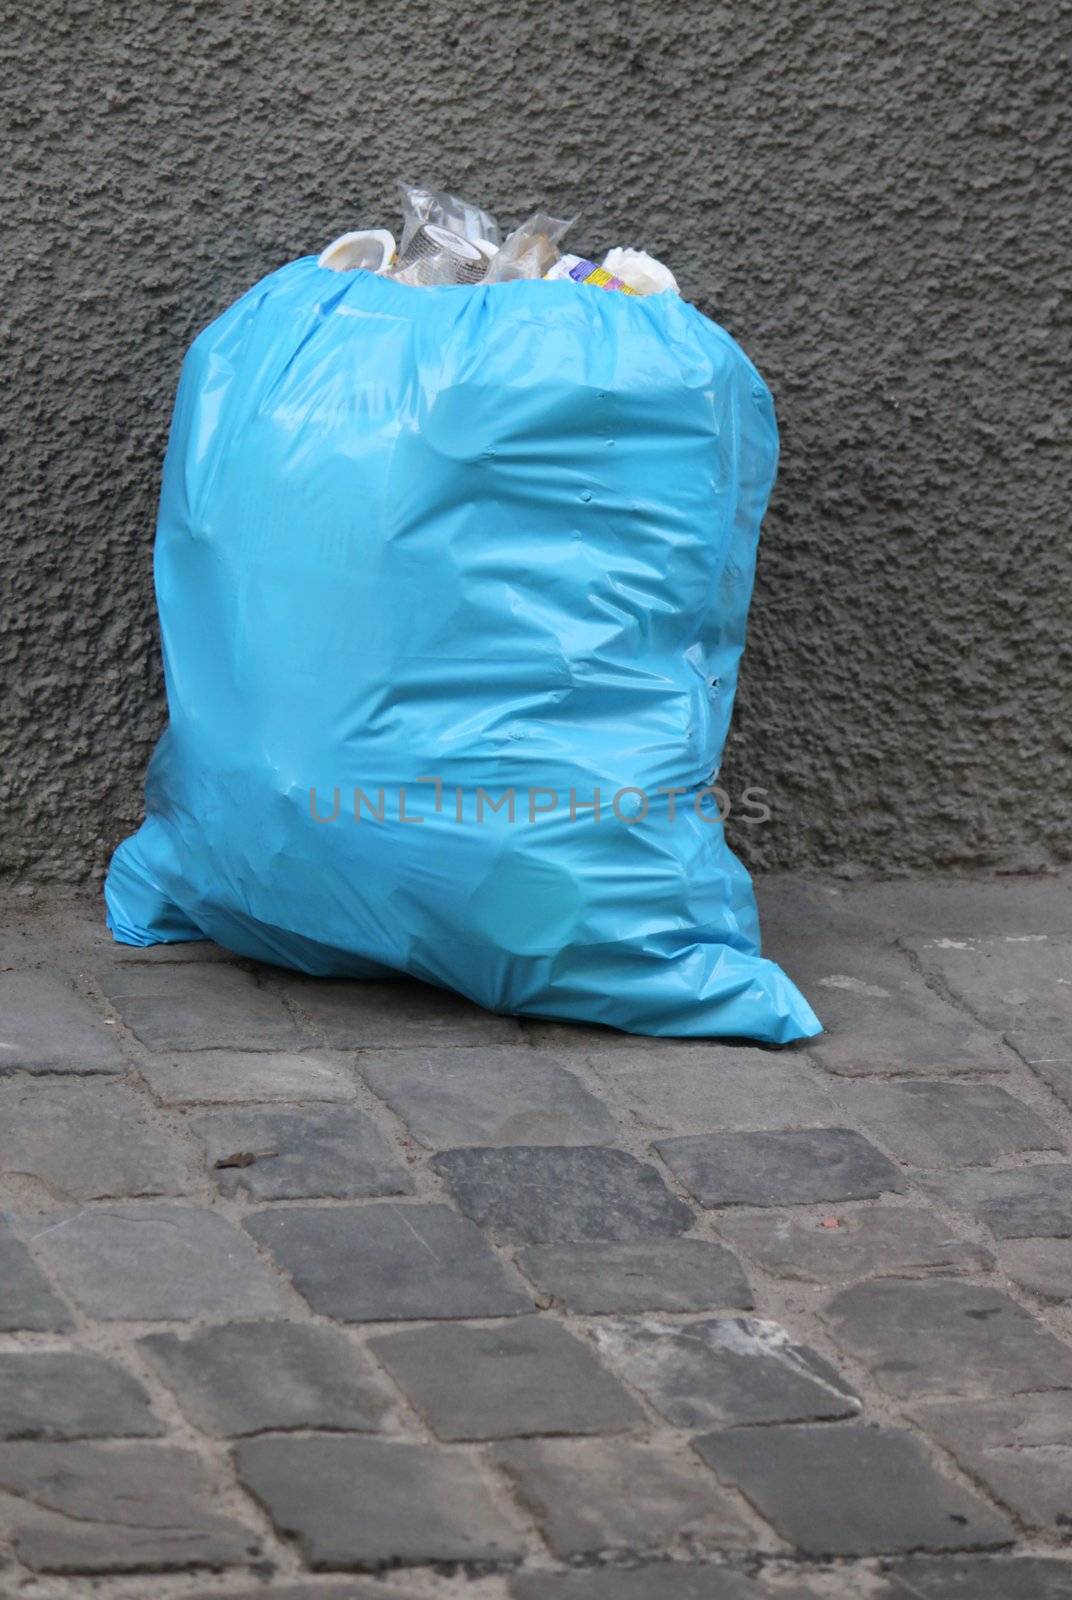 One blue garbage pack in the street